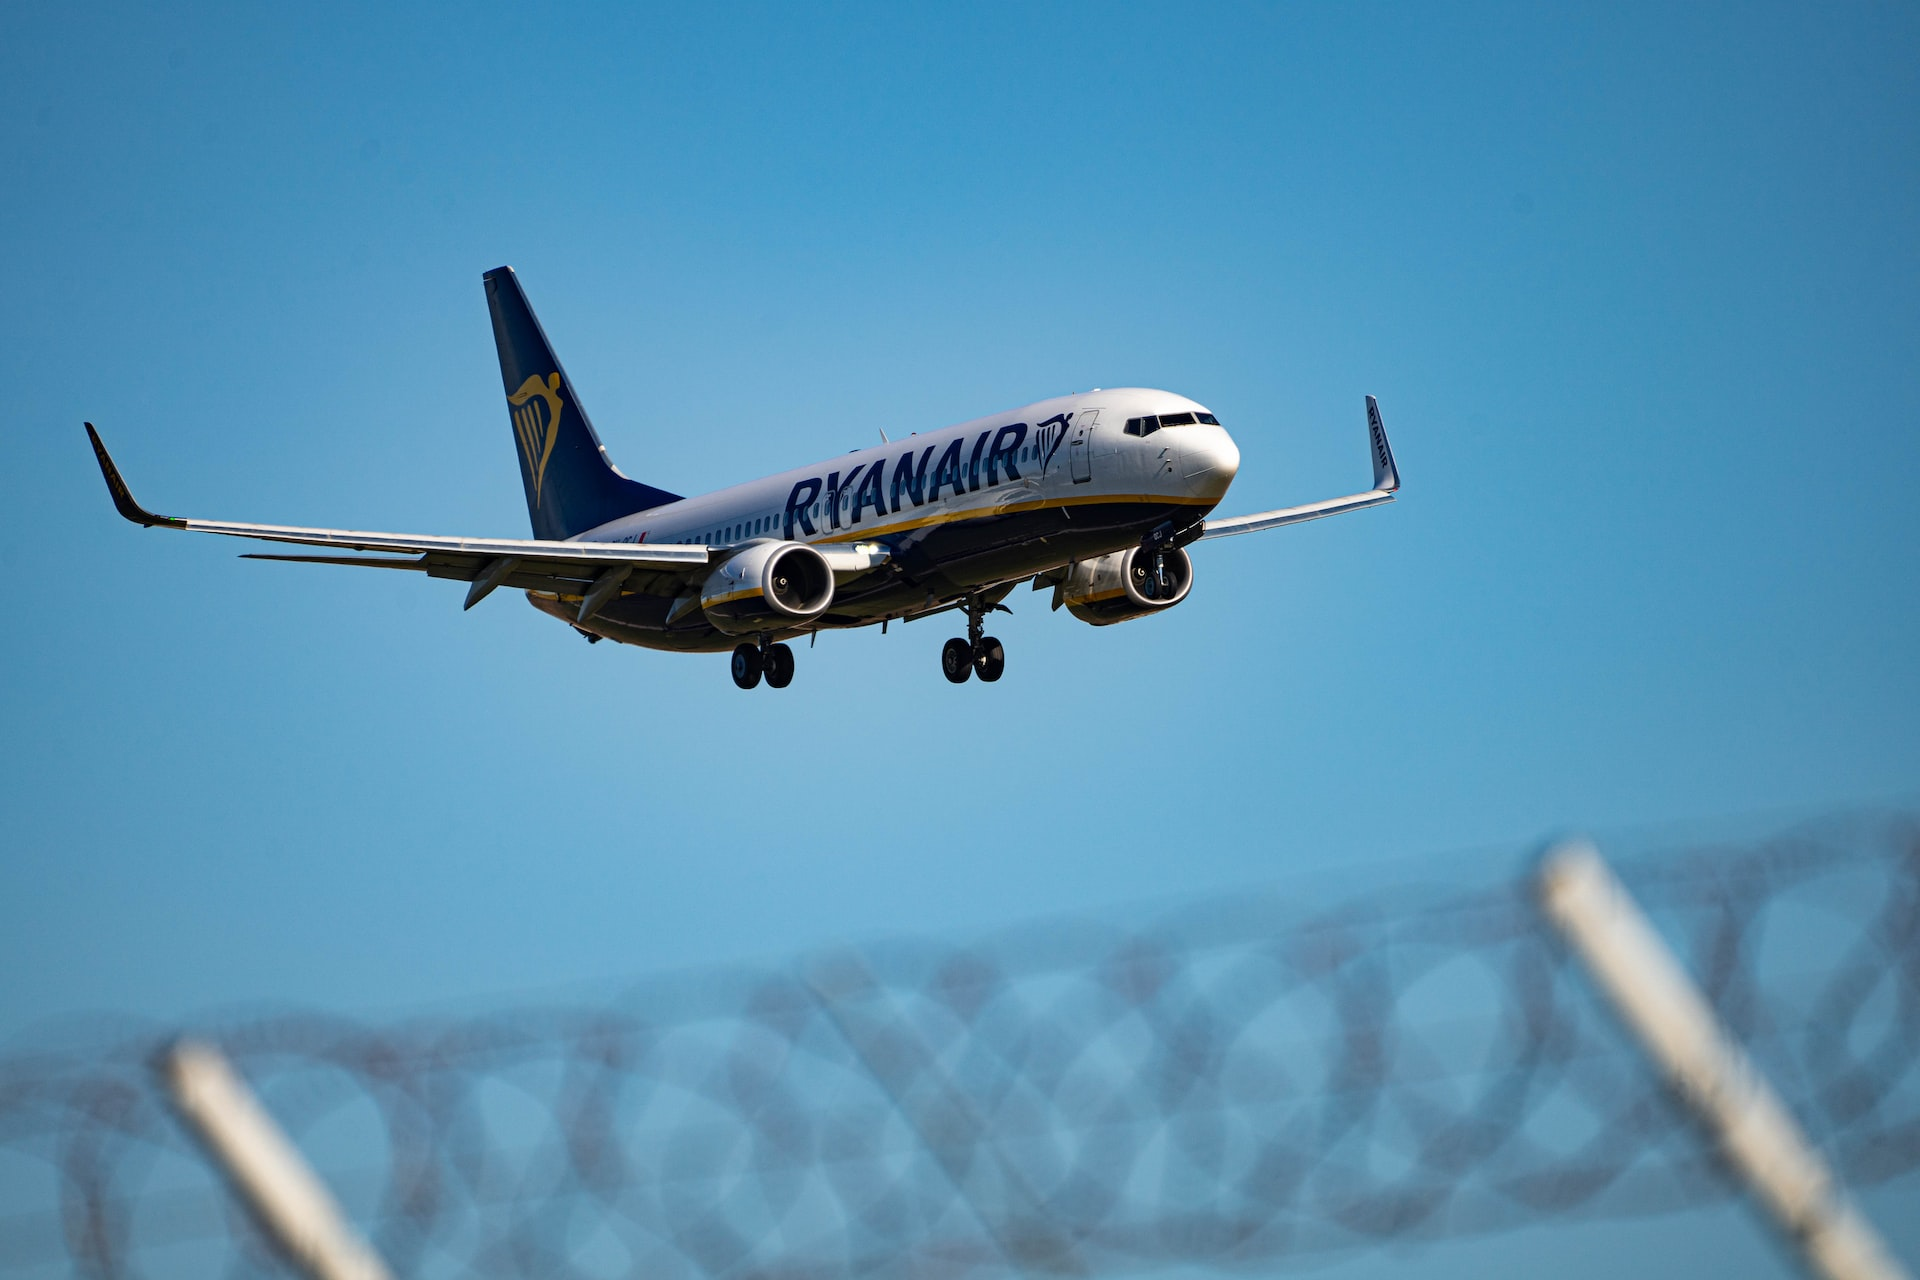 A Ryanair aircraft landing at an airport behind a barbed wire fence.